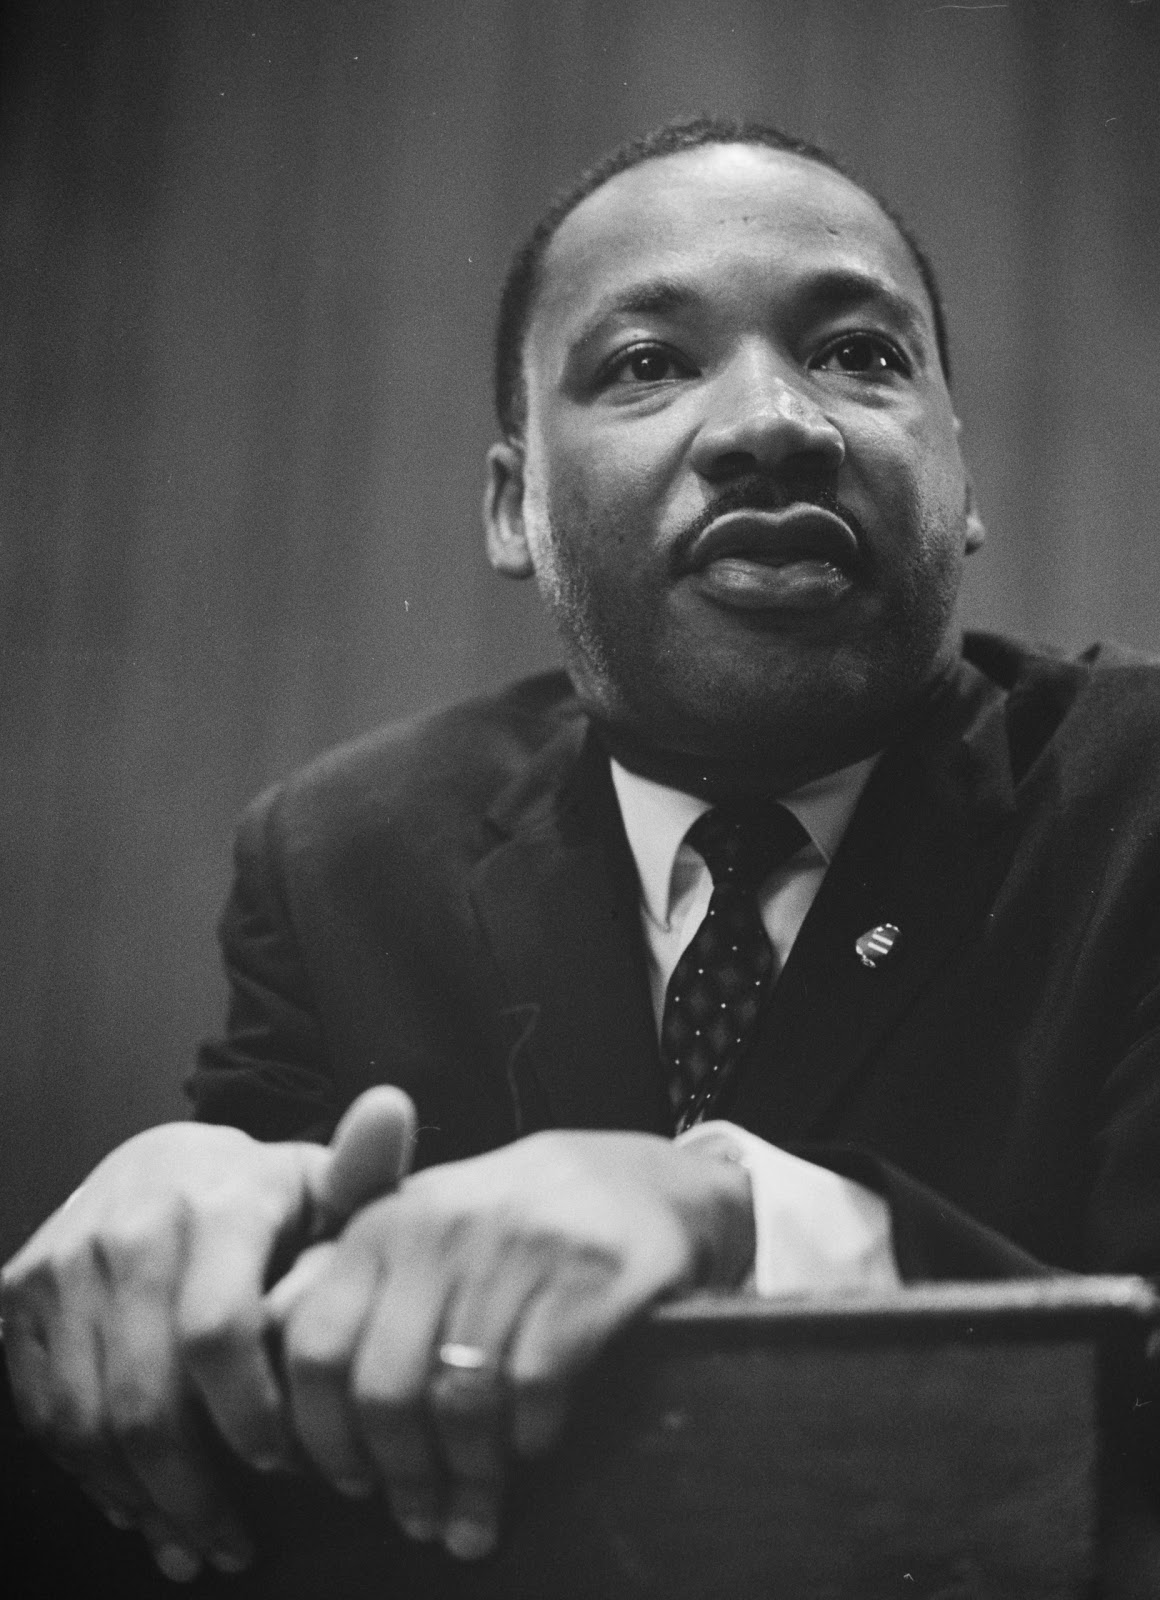 [Martin-Luther-King-1964-leaning-on-a-lectern.jpg]